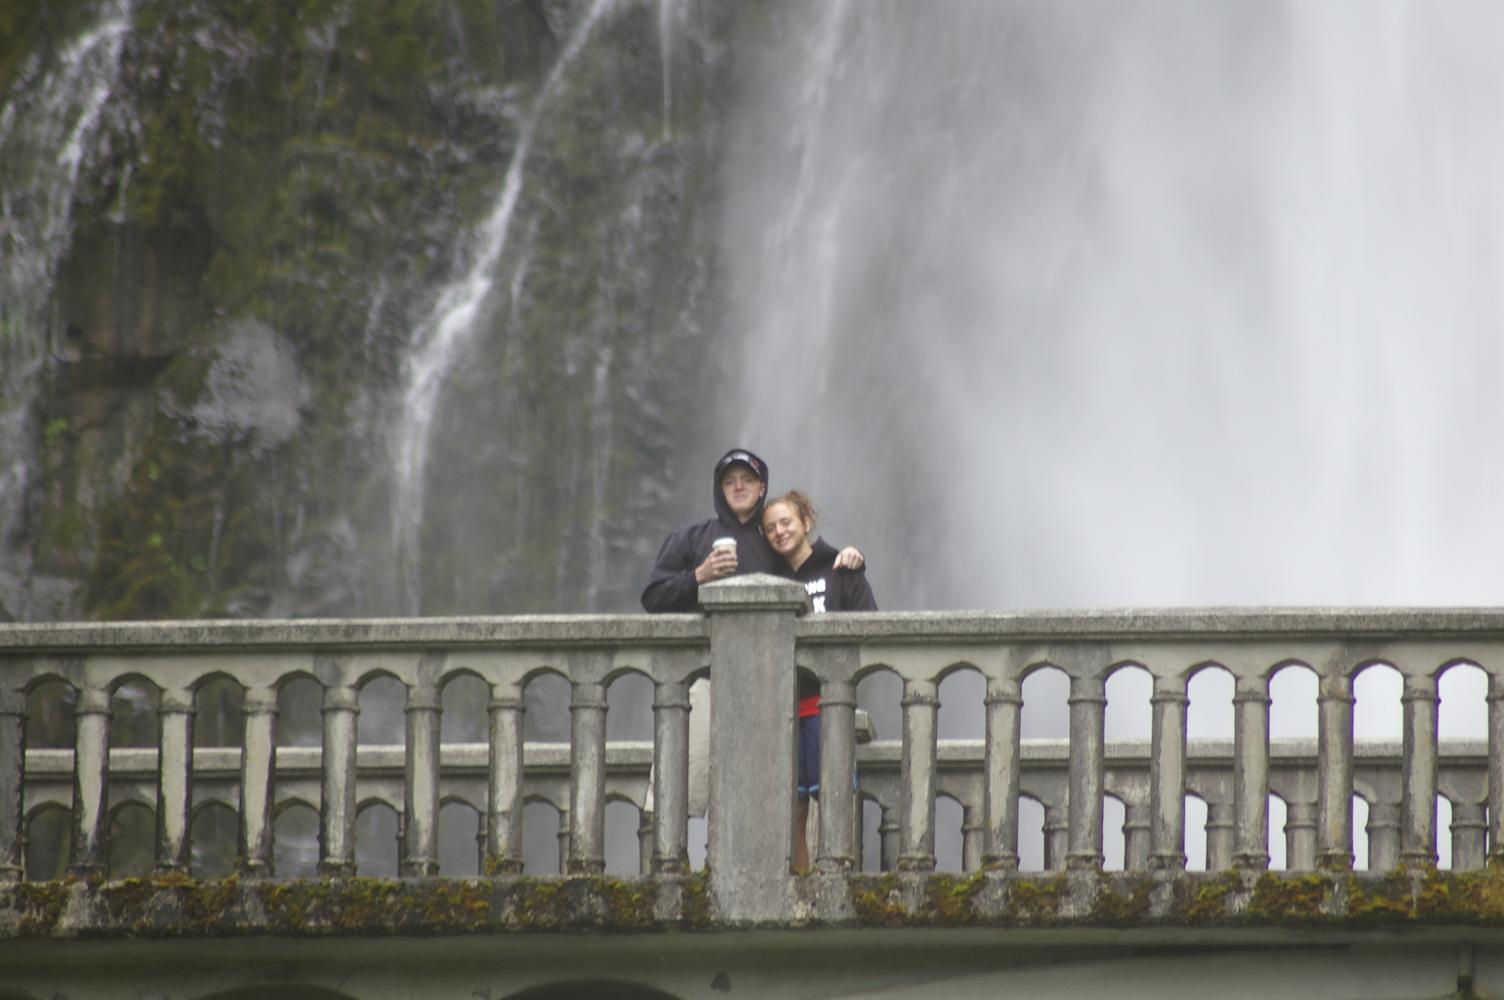 [Christopher+and+Brittney+at+the+falls.jpg]